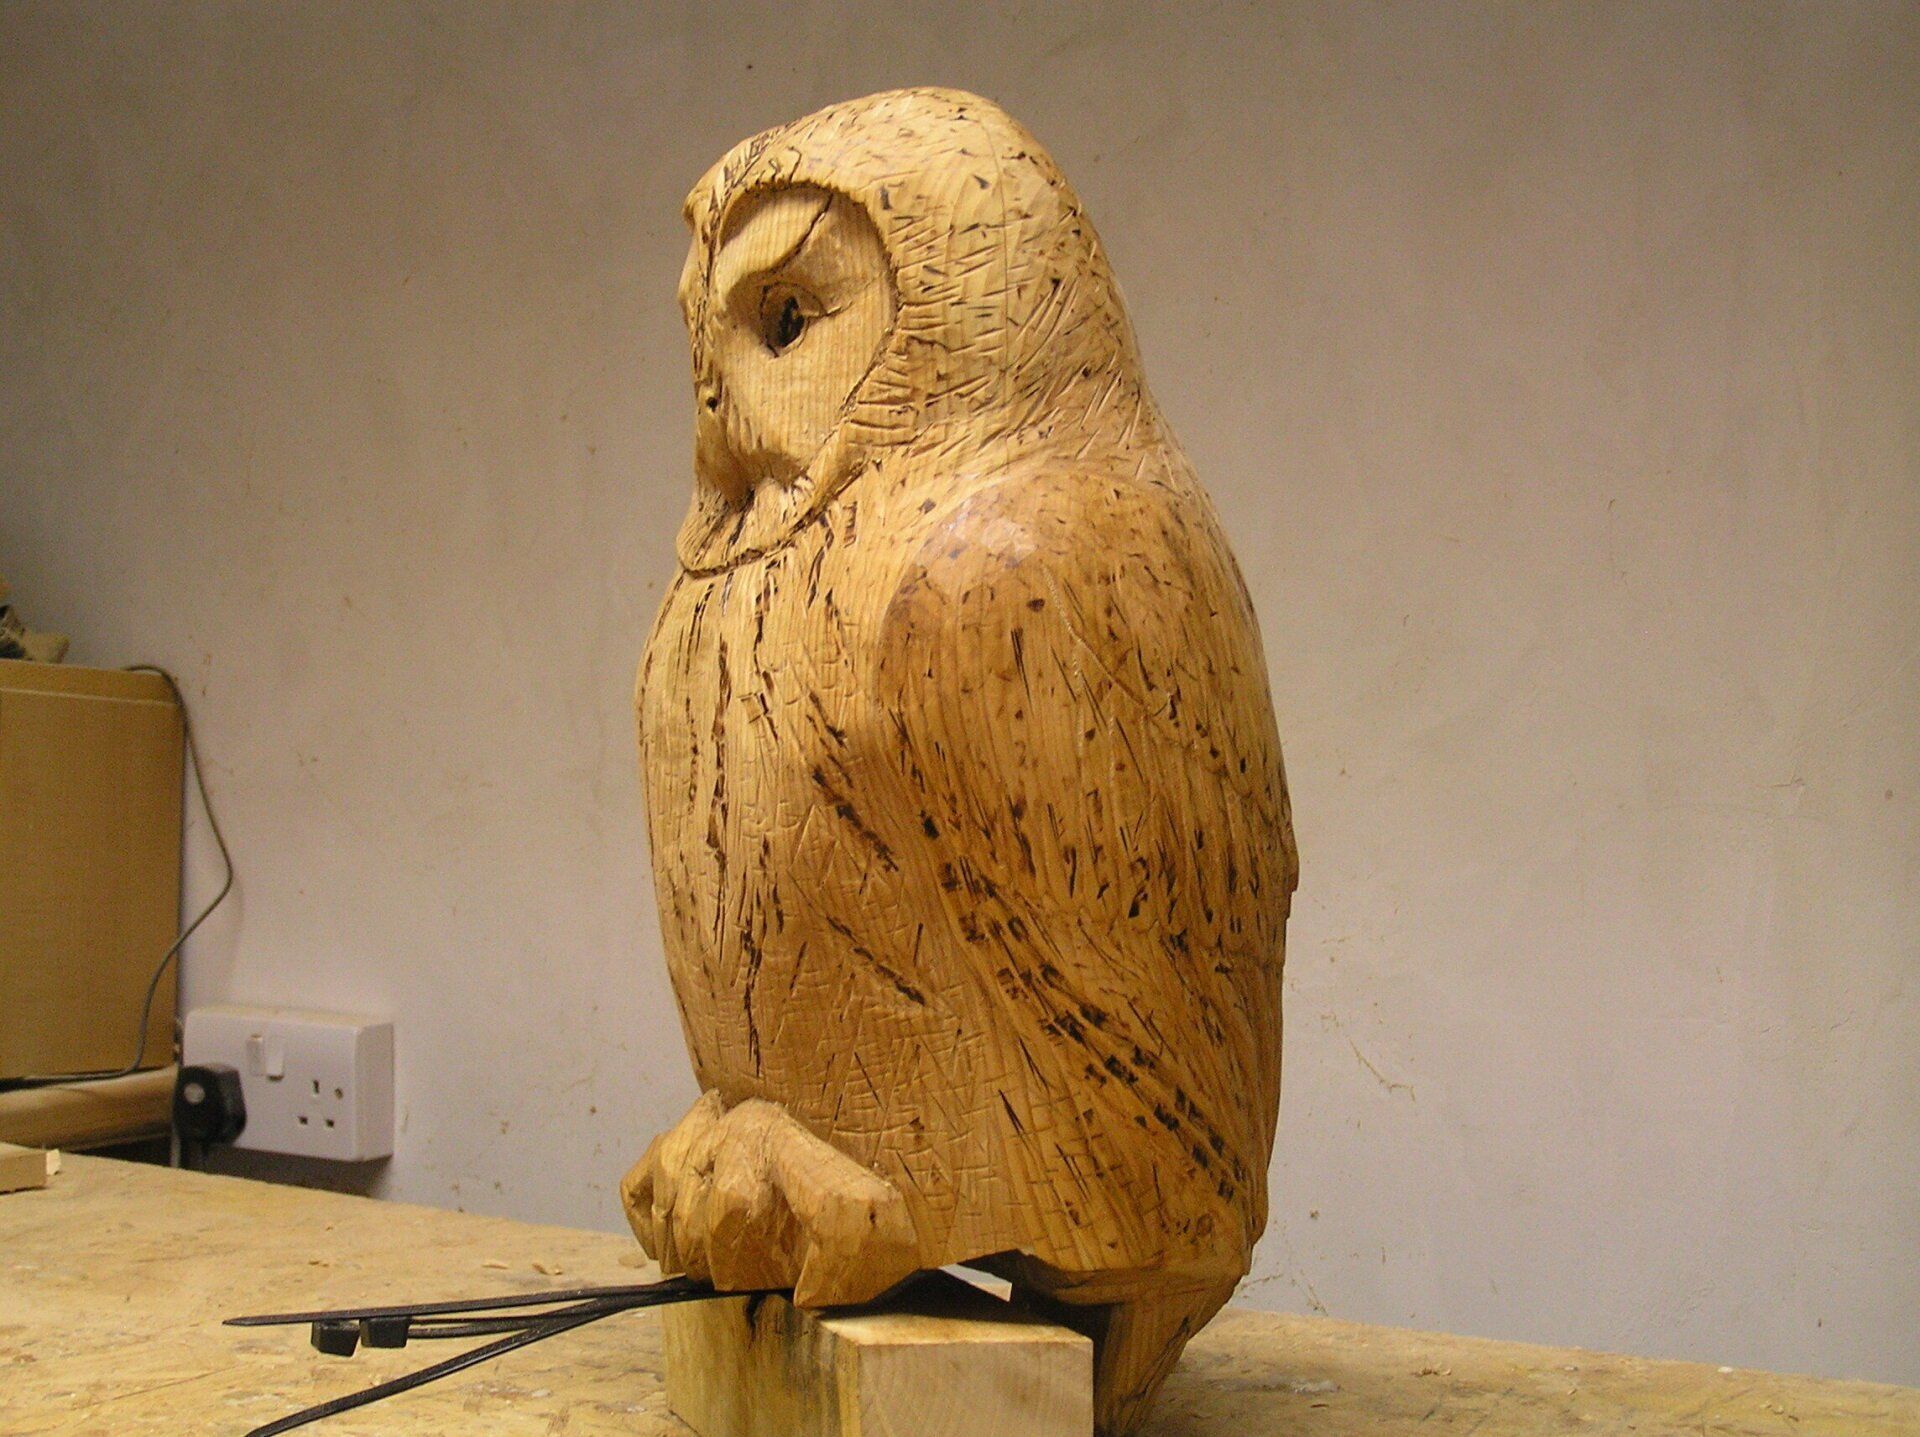 A wooden owl sculpture made by Ingrained Culture